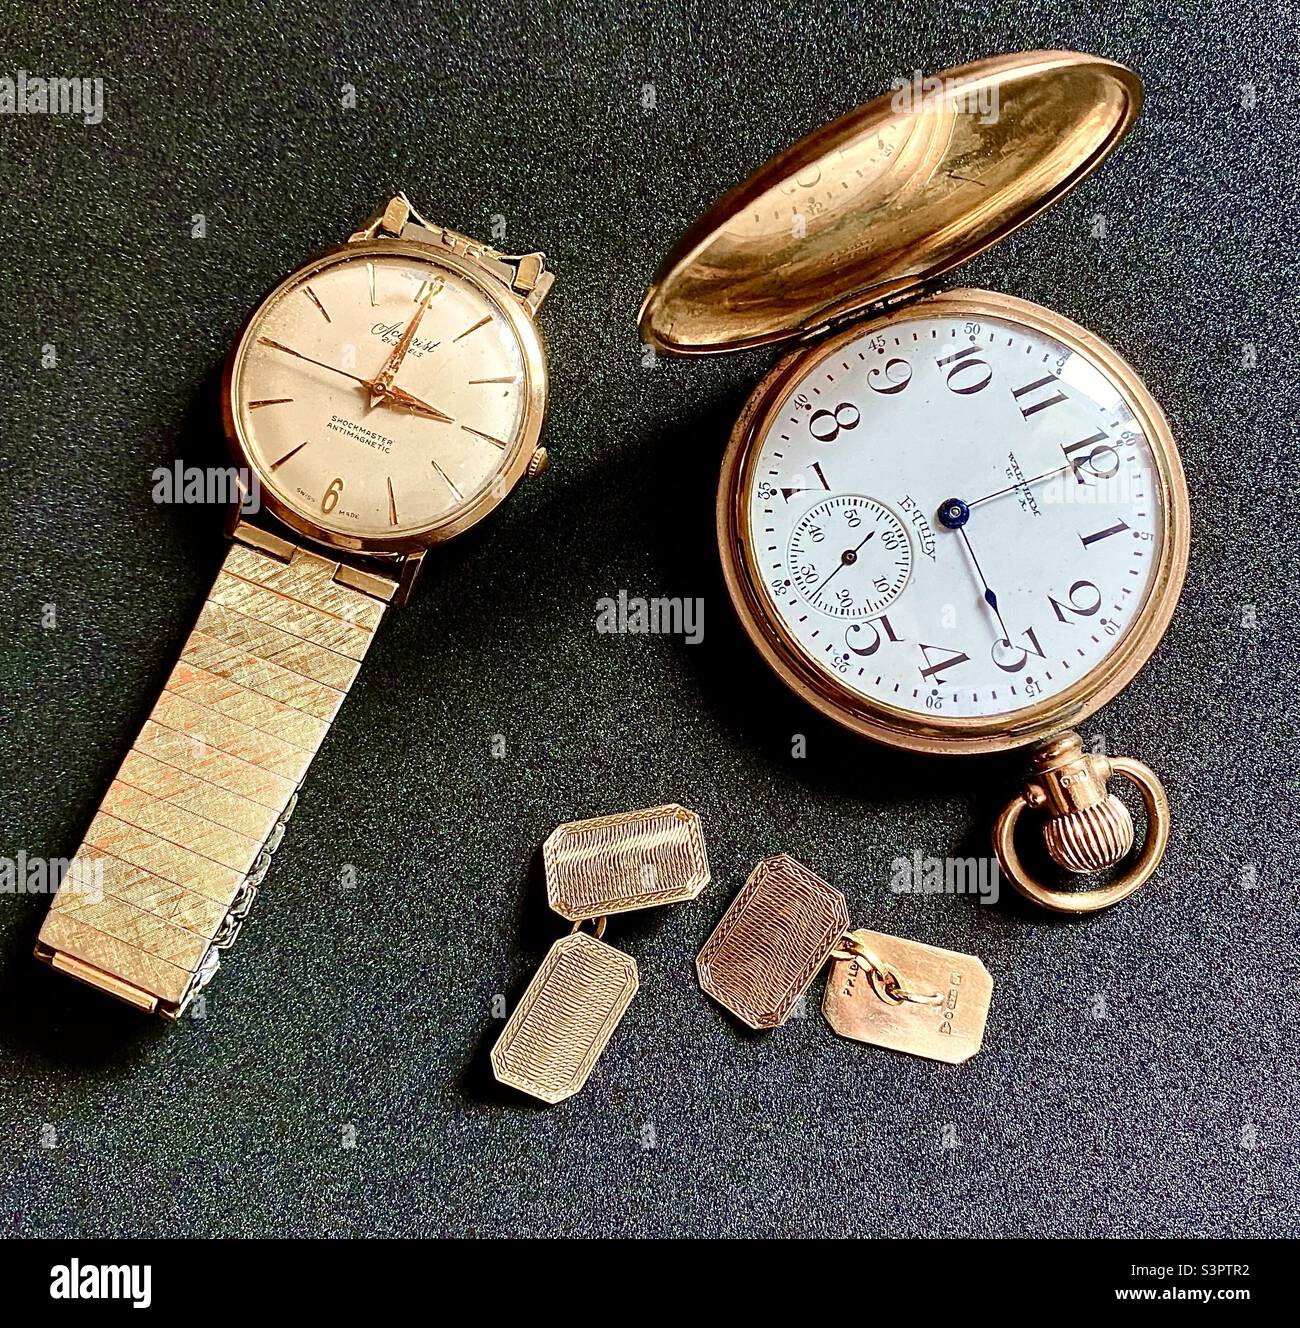 Black background showing gentleman’s gold accessories: a vintage Waltham (USA) Equity gold pocket watch, an Accurist Shockmaster Anti-magnetic gold wrist watch and a pair of vintage gold cuff links. Stock Photo